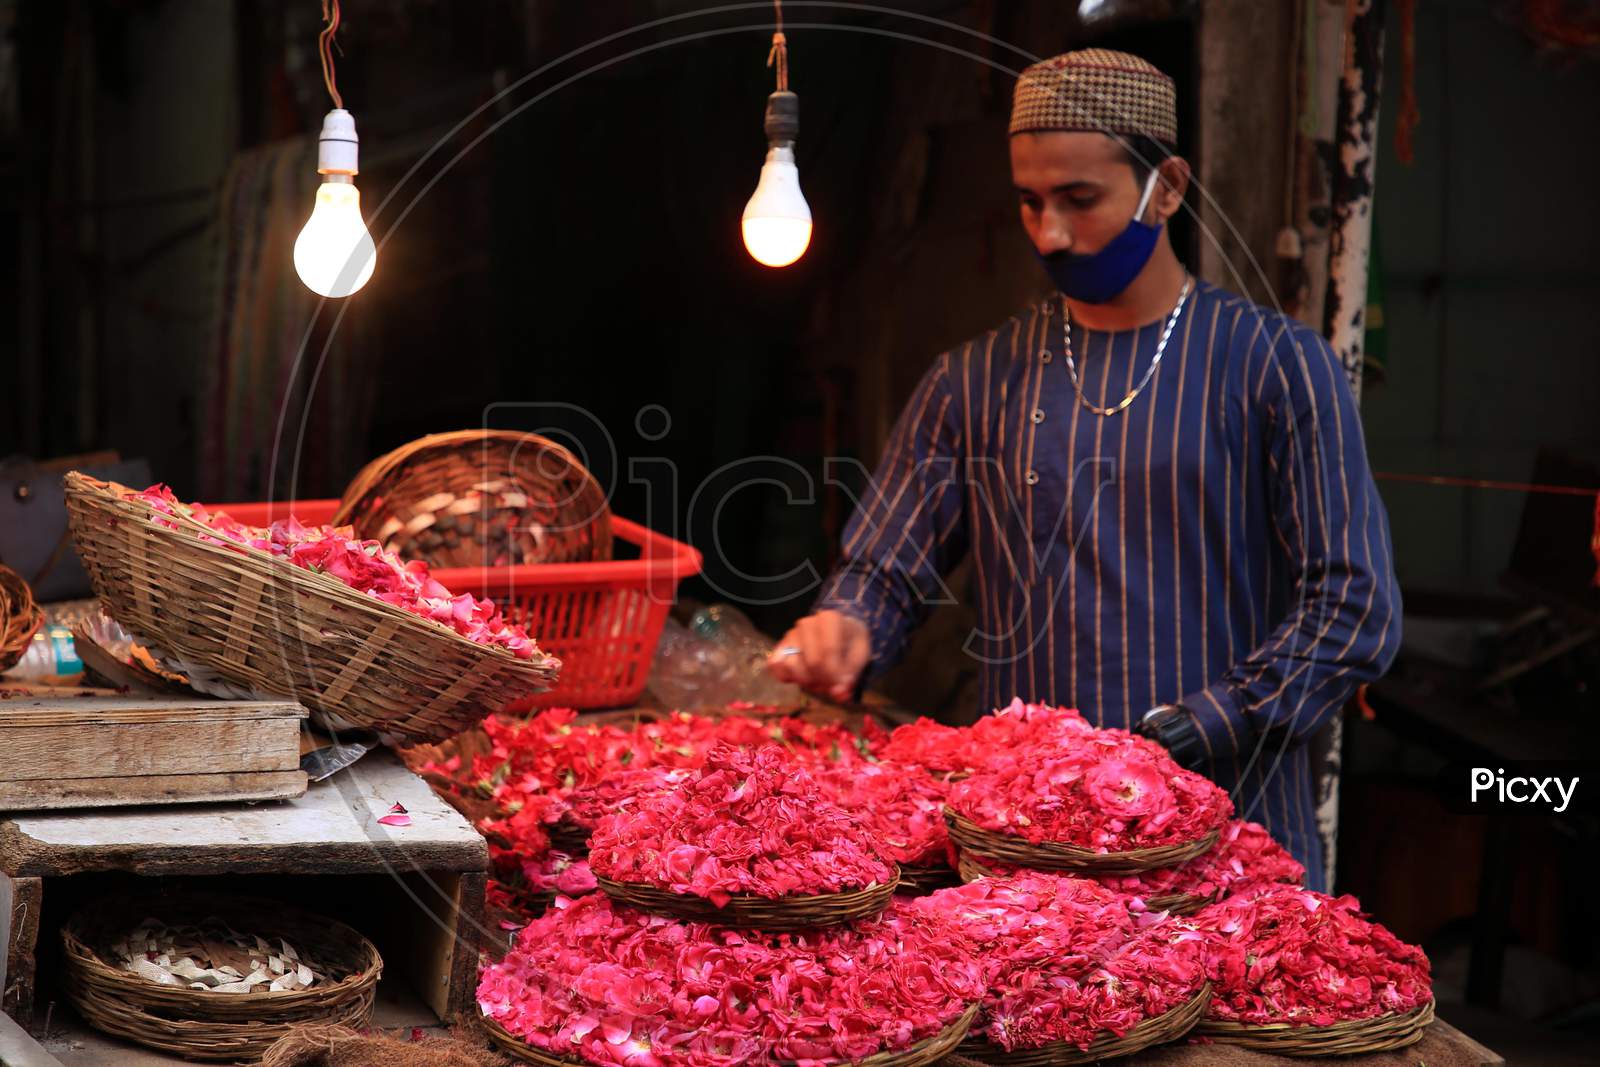 A Muslim devotee stands next to a stall selling flower petals outside the shrine of Sufi saint Khwaja Moinuddin Chishti In Ajmer, On August 1, 2020.